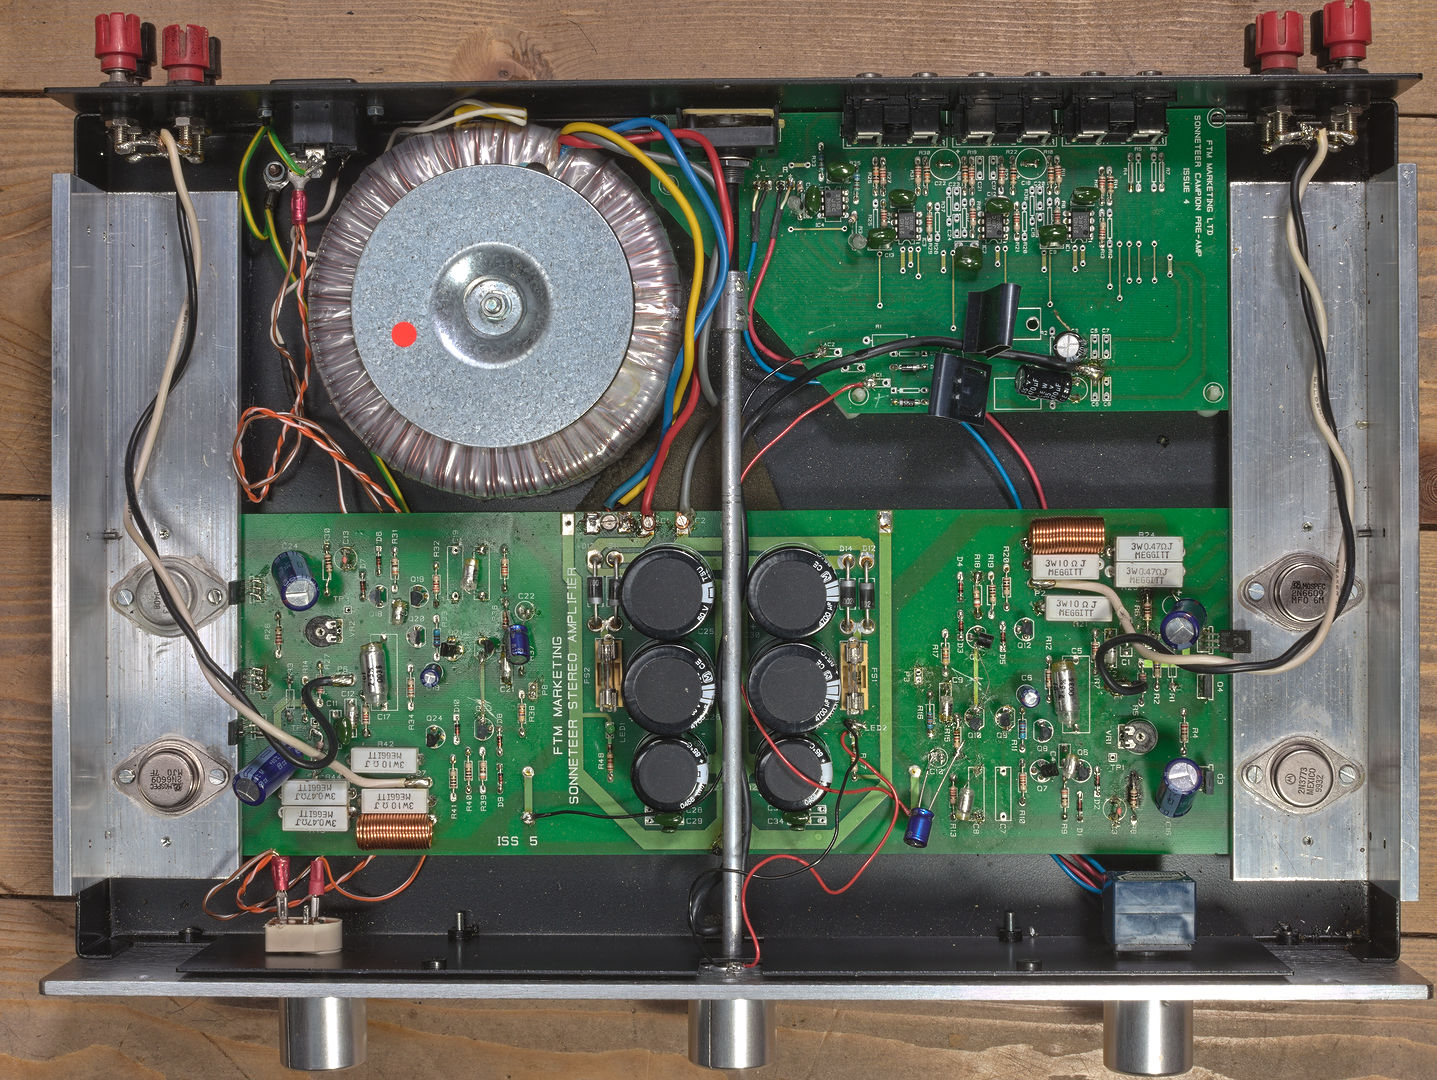 The inside of the amplifier before repair